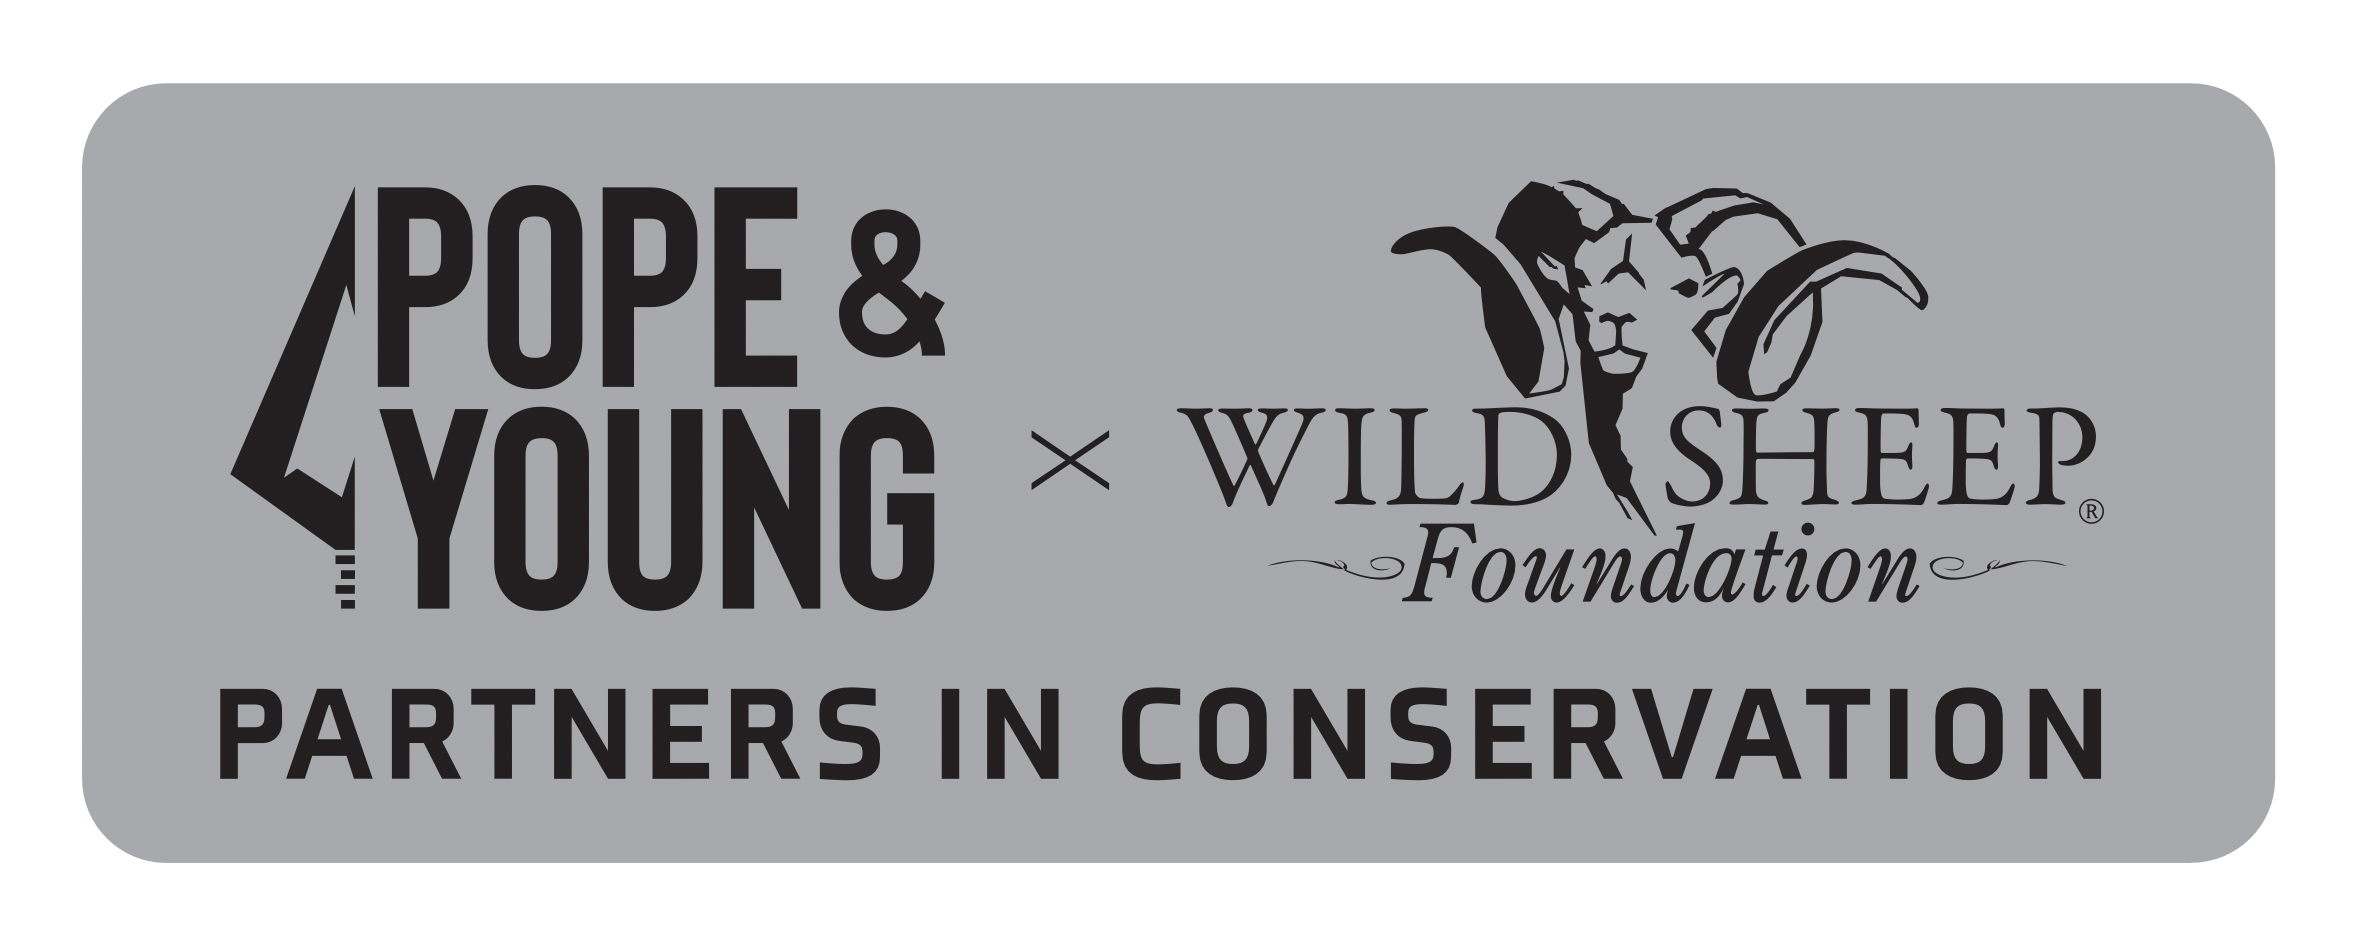 
Pope and Young and Wild Sheep Foundation